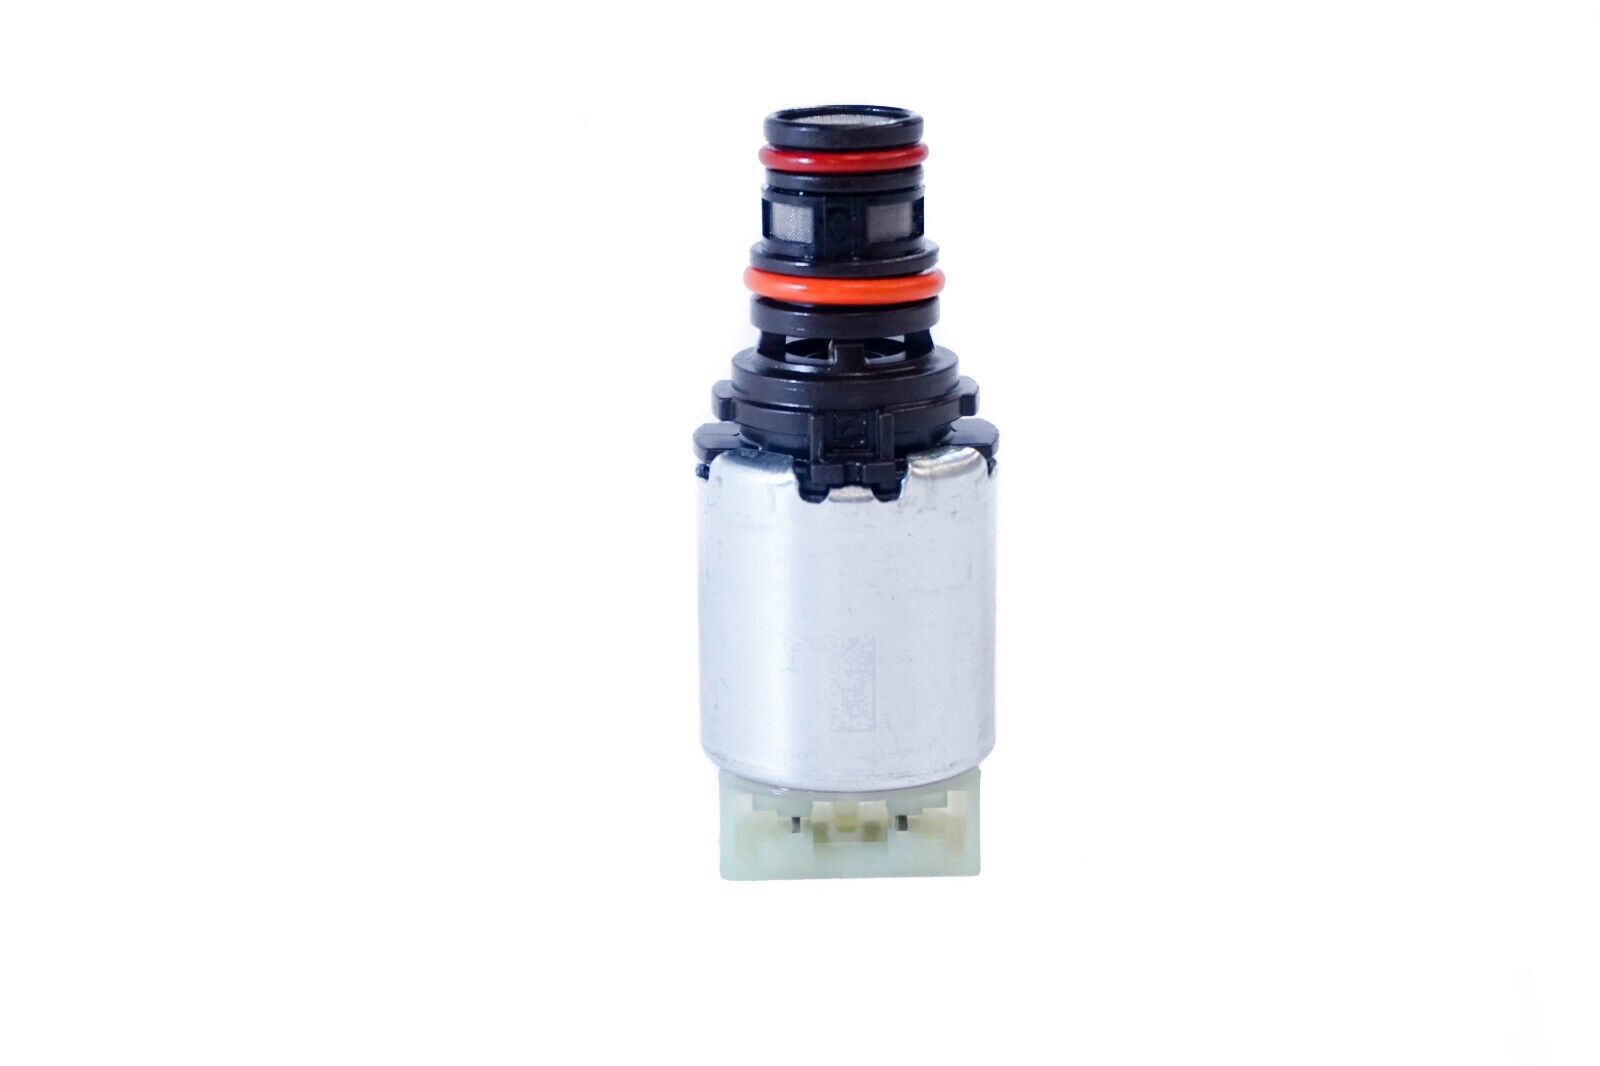 A236420AB - 6R140, ELECTRONIC PRESSURE CONTROL SOLENOID, #2 HIGH BLEED, 2011-16